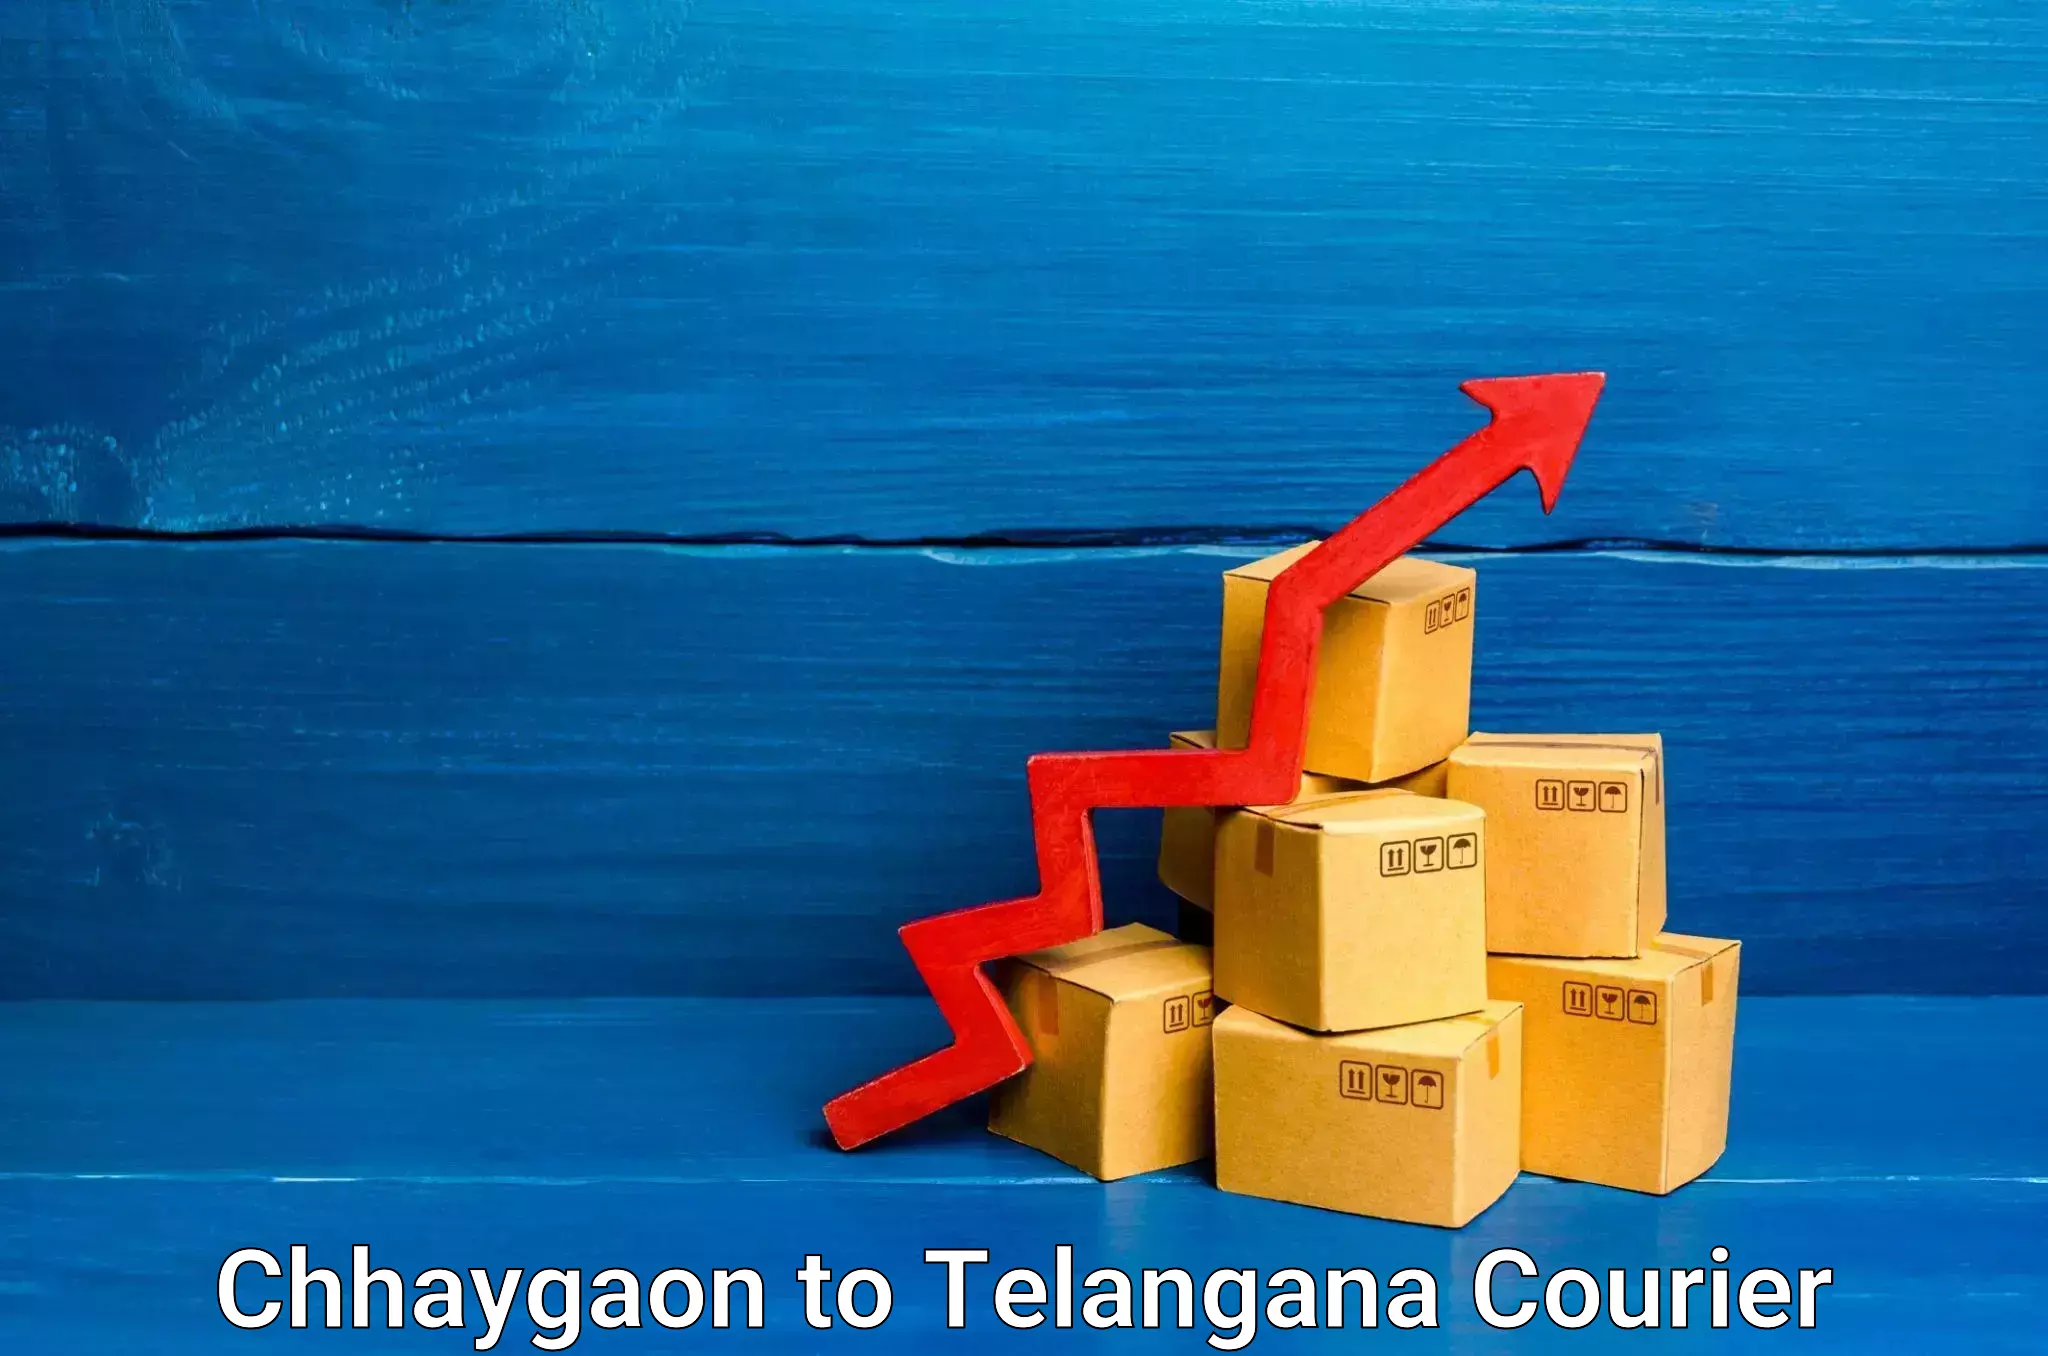 Easy return solutions Chhaygaon to Madgulapally